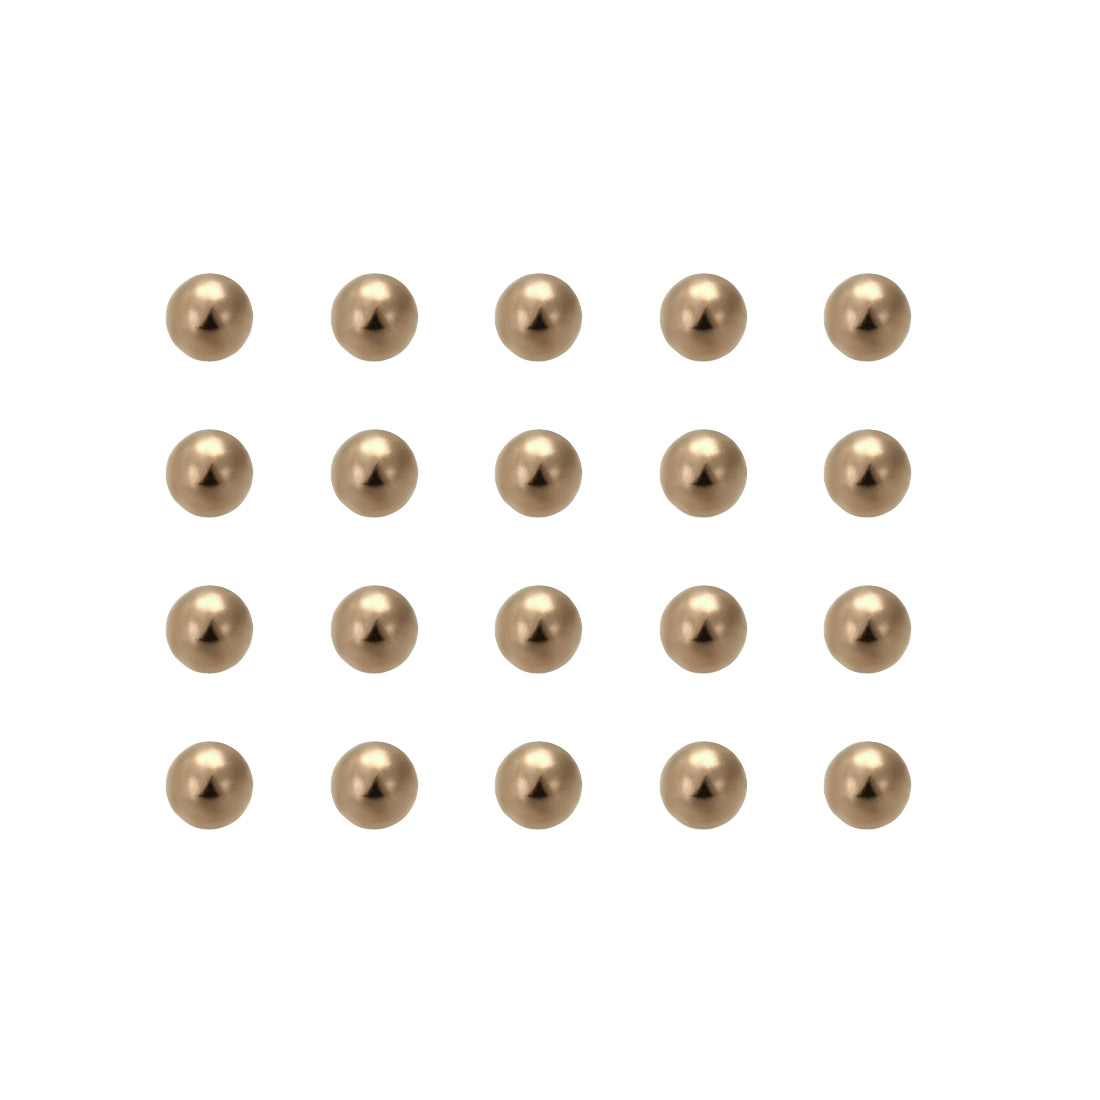 Uxcell Uxcell 1/4-inch Precision Solid Brass Bearing Balls 50pcs